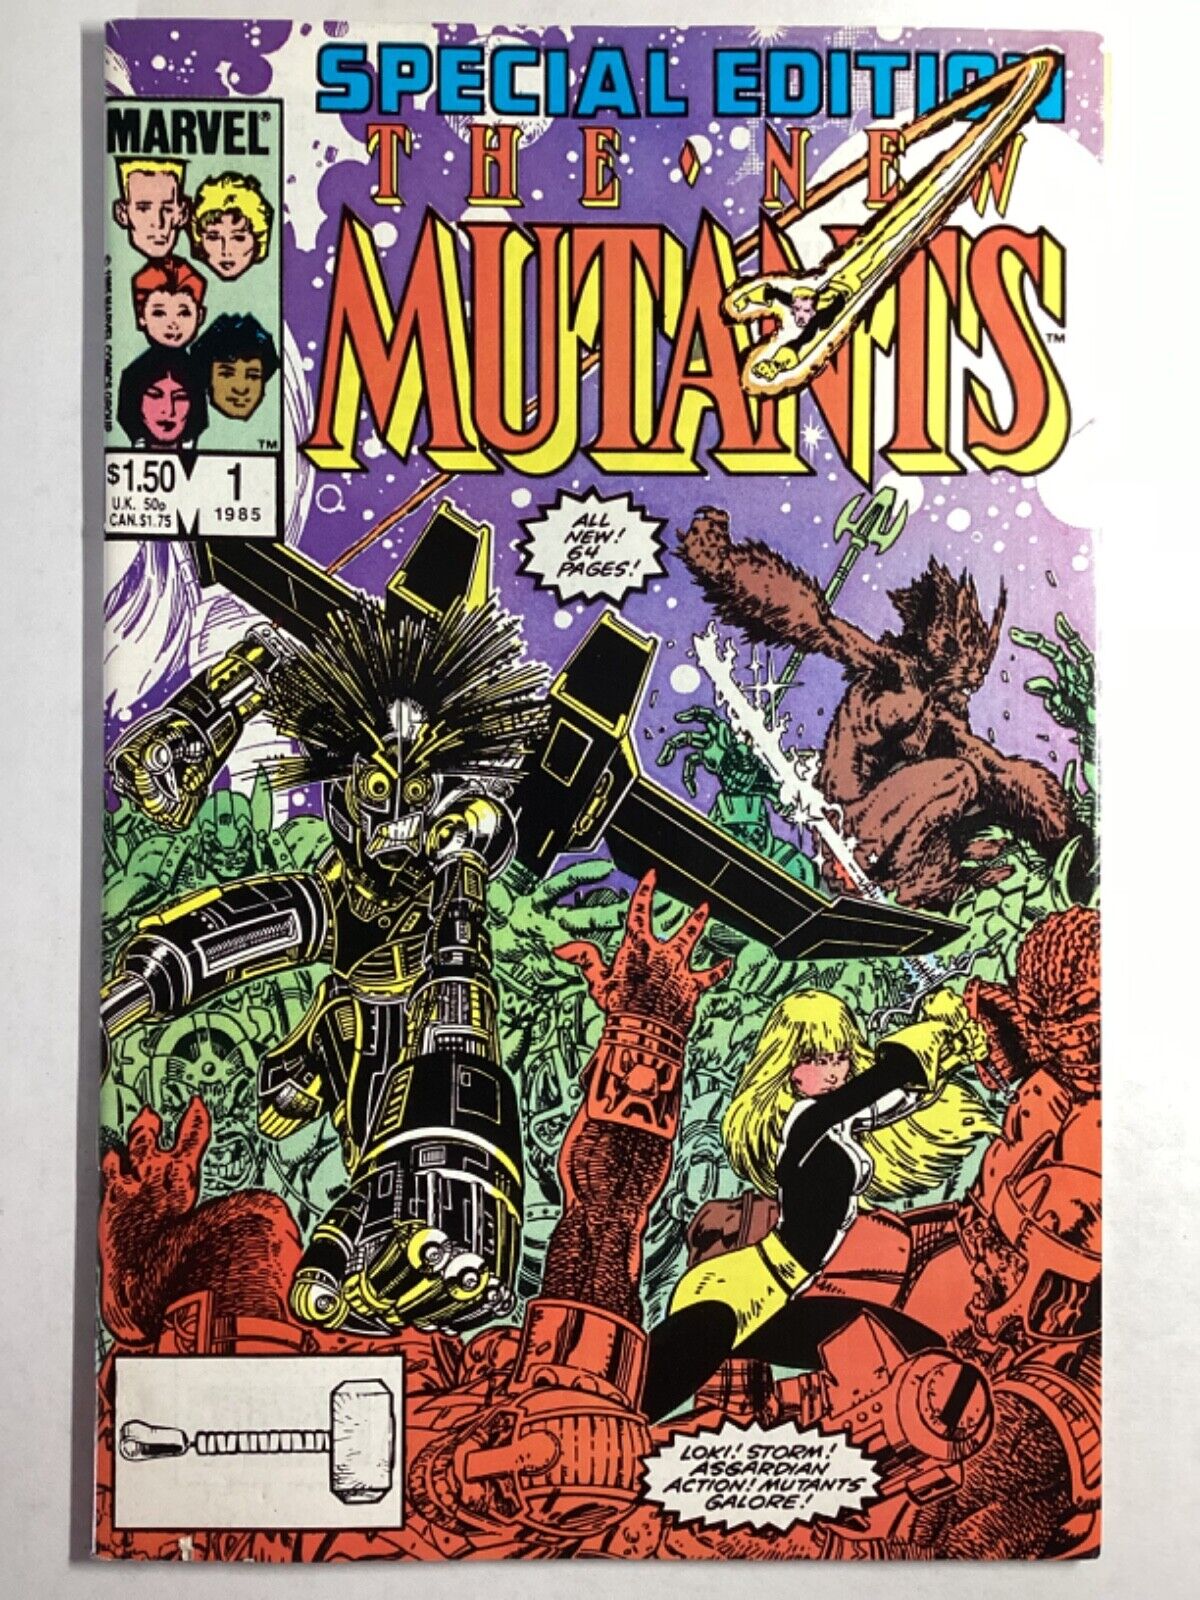 THE NEW MUTANTS SPECIAL EDITION ISSUE #1  MARVEL  COMICS JAN 1, 1985   KEY ISSUE